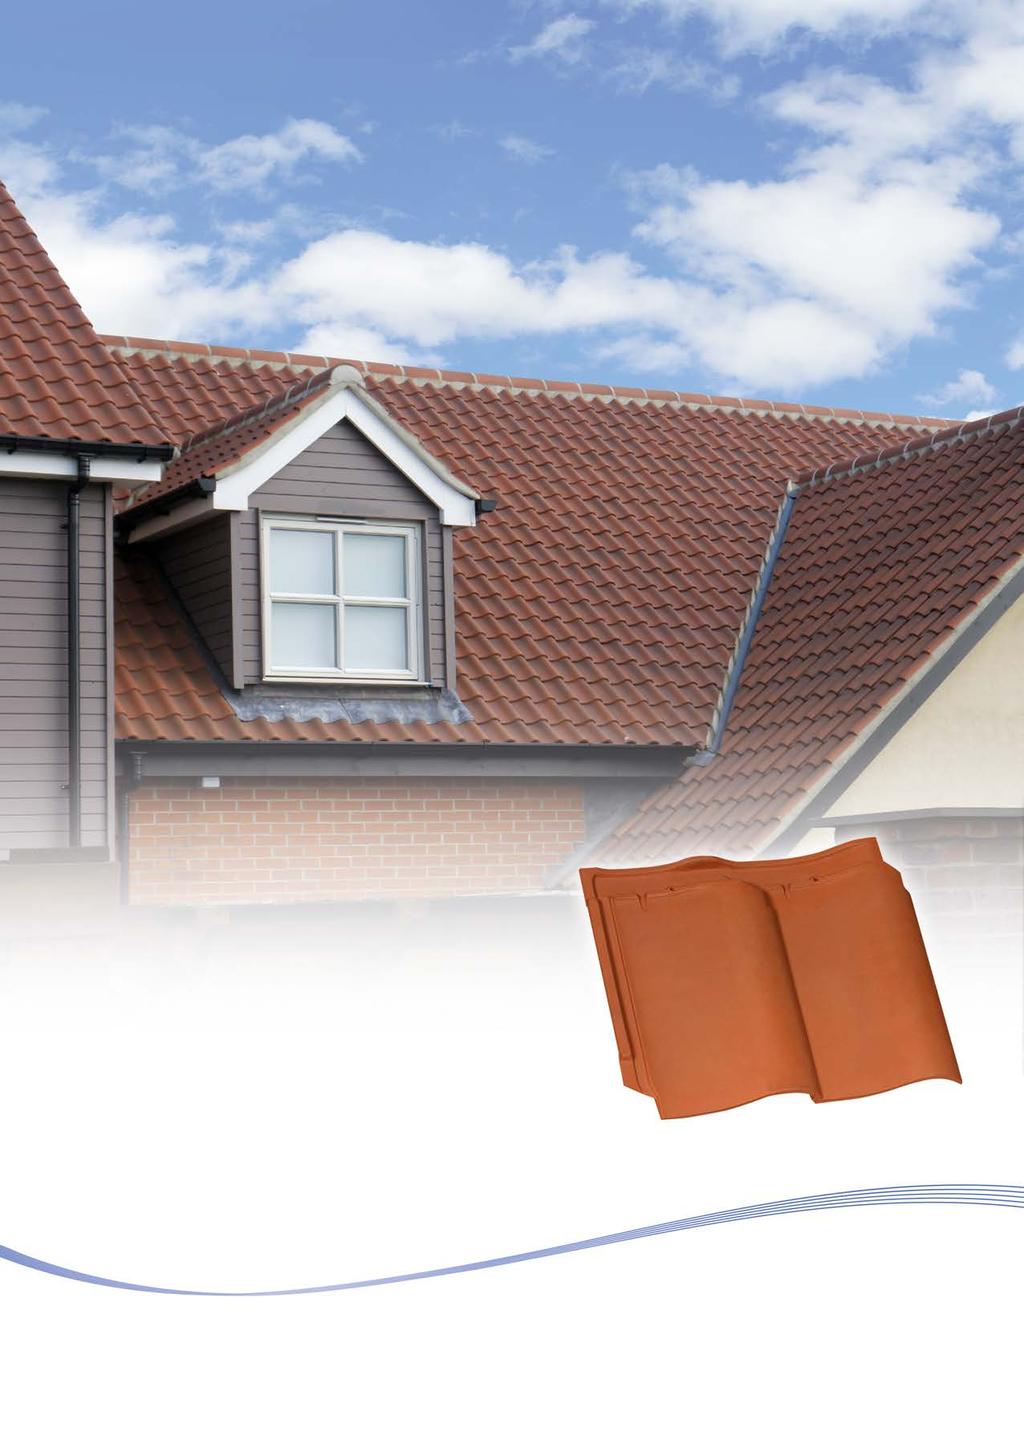 The IMERYS DOUBLE PANNE S Clay PANtile A classic appearance with economical coverage Uniclass Cl/SfB L5211 (47) Ng2 Economical 10m² coverage Low roof pitch